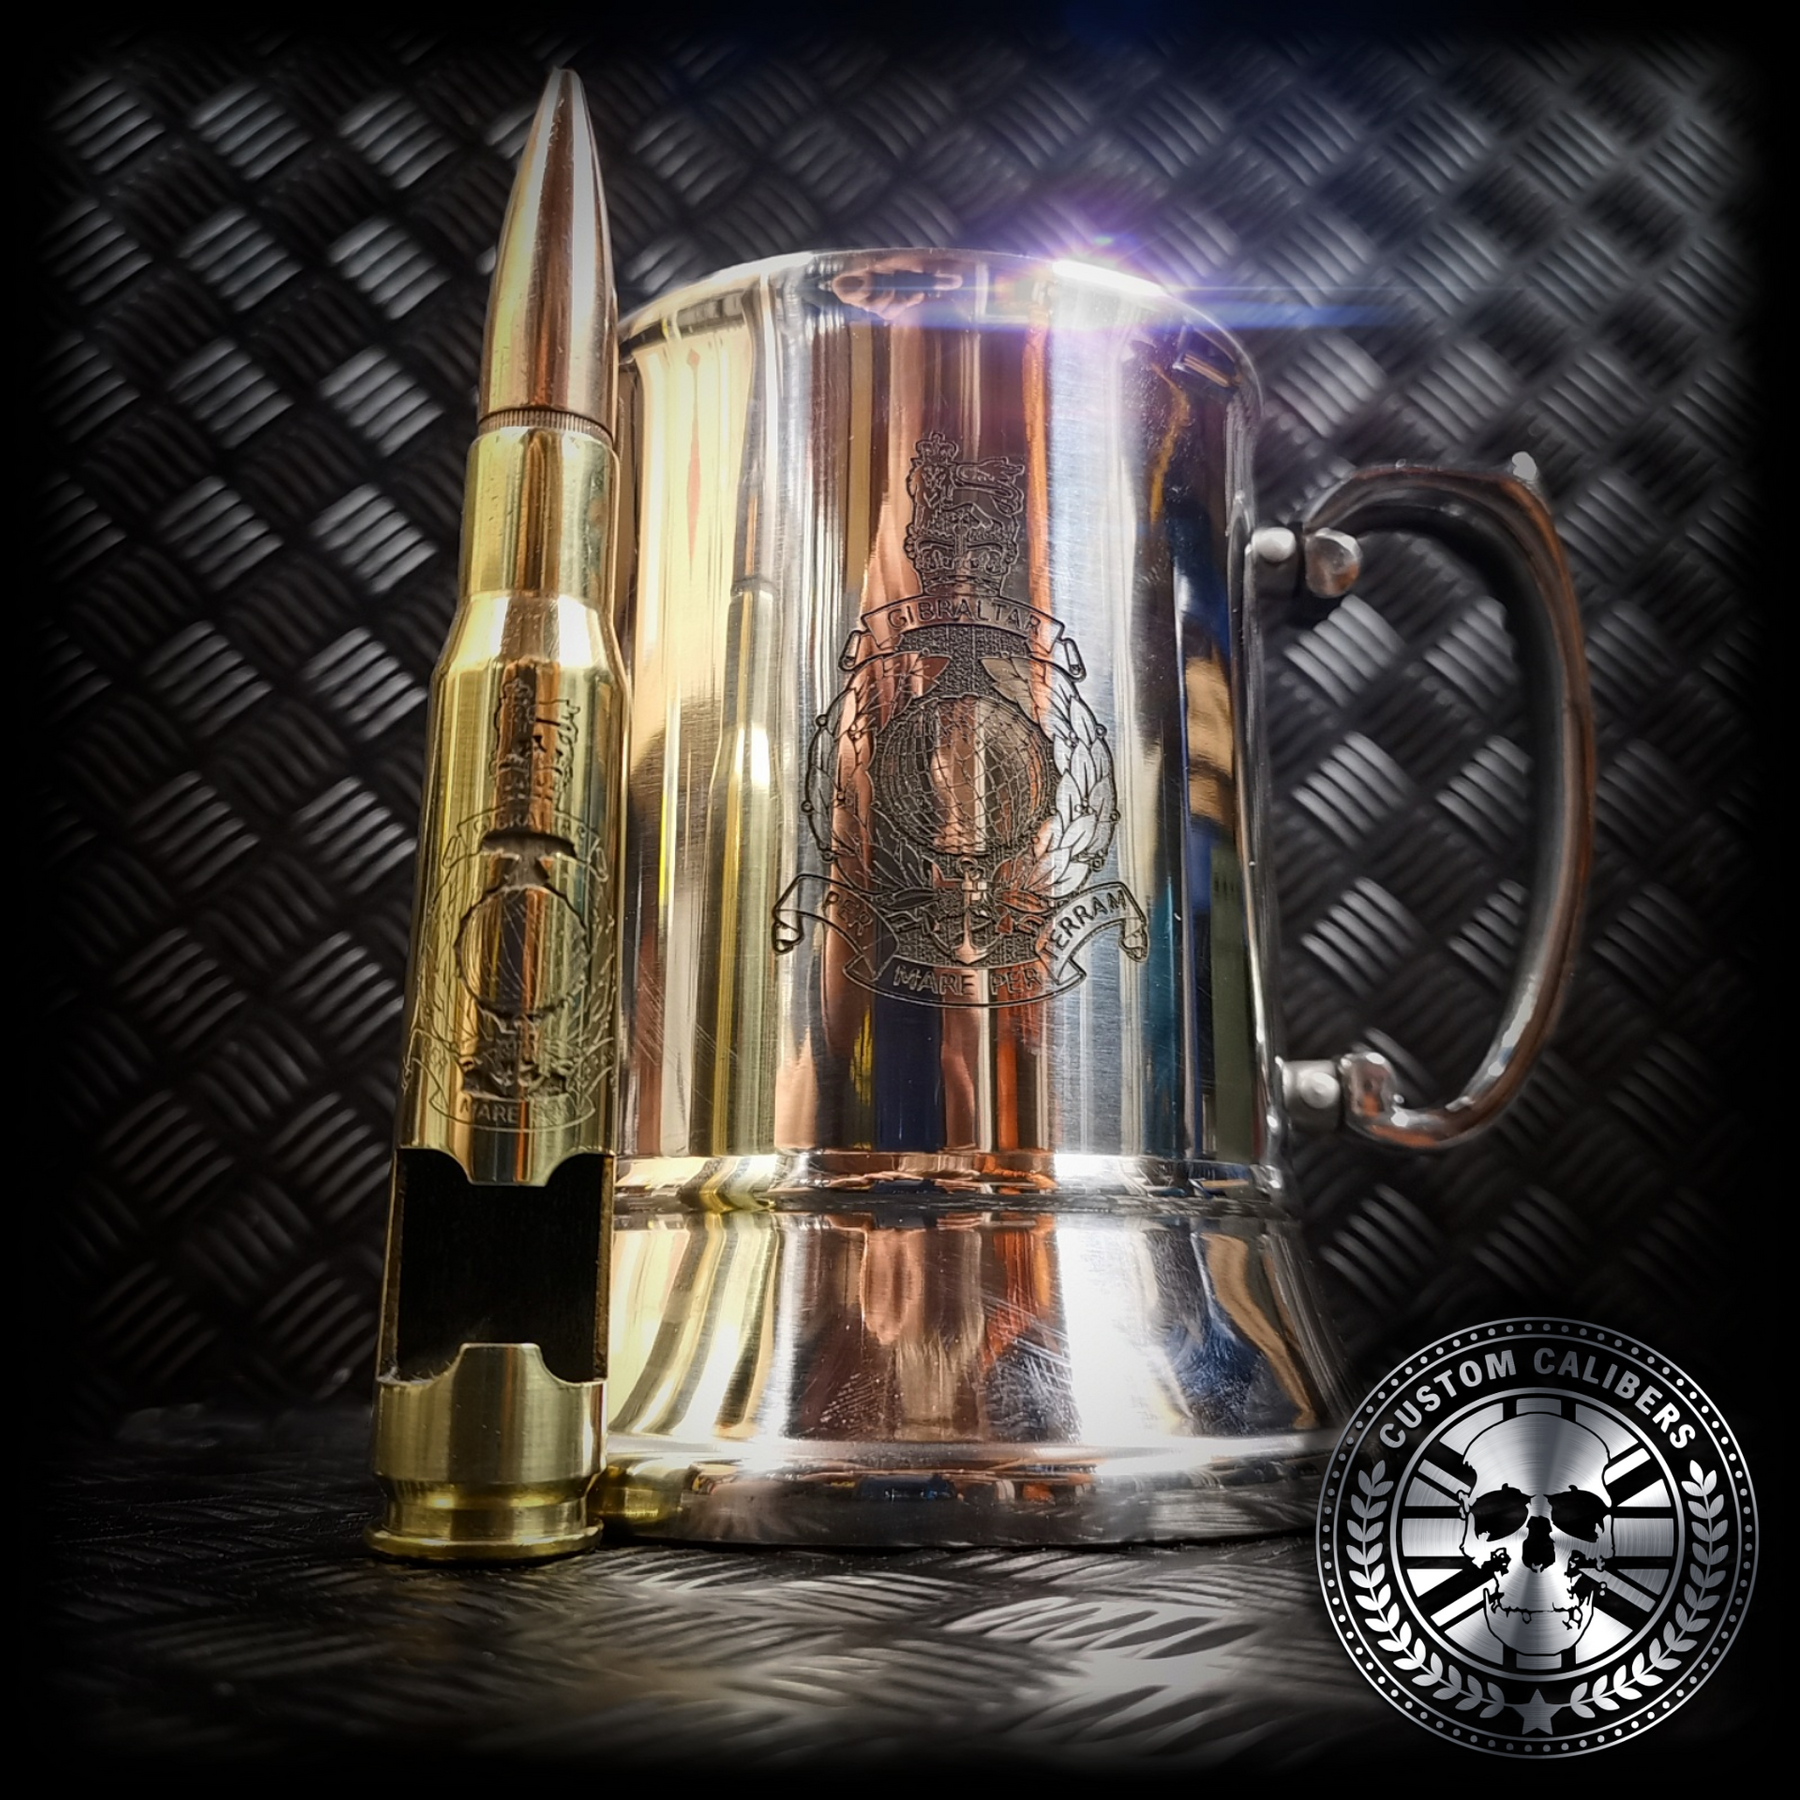 a great shot of an engraved steel tankard and matching brass 50 cal bullet bottle opener with royal marines crest